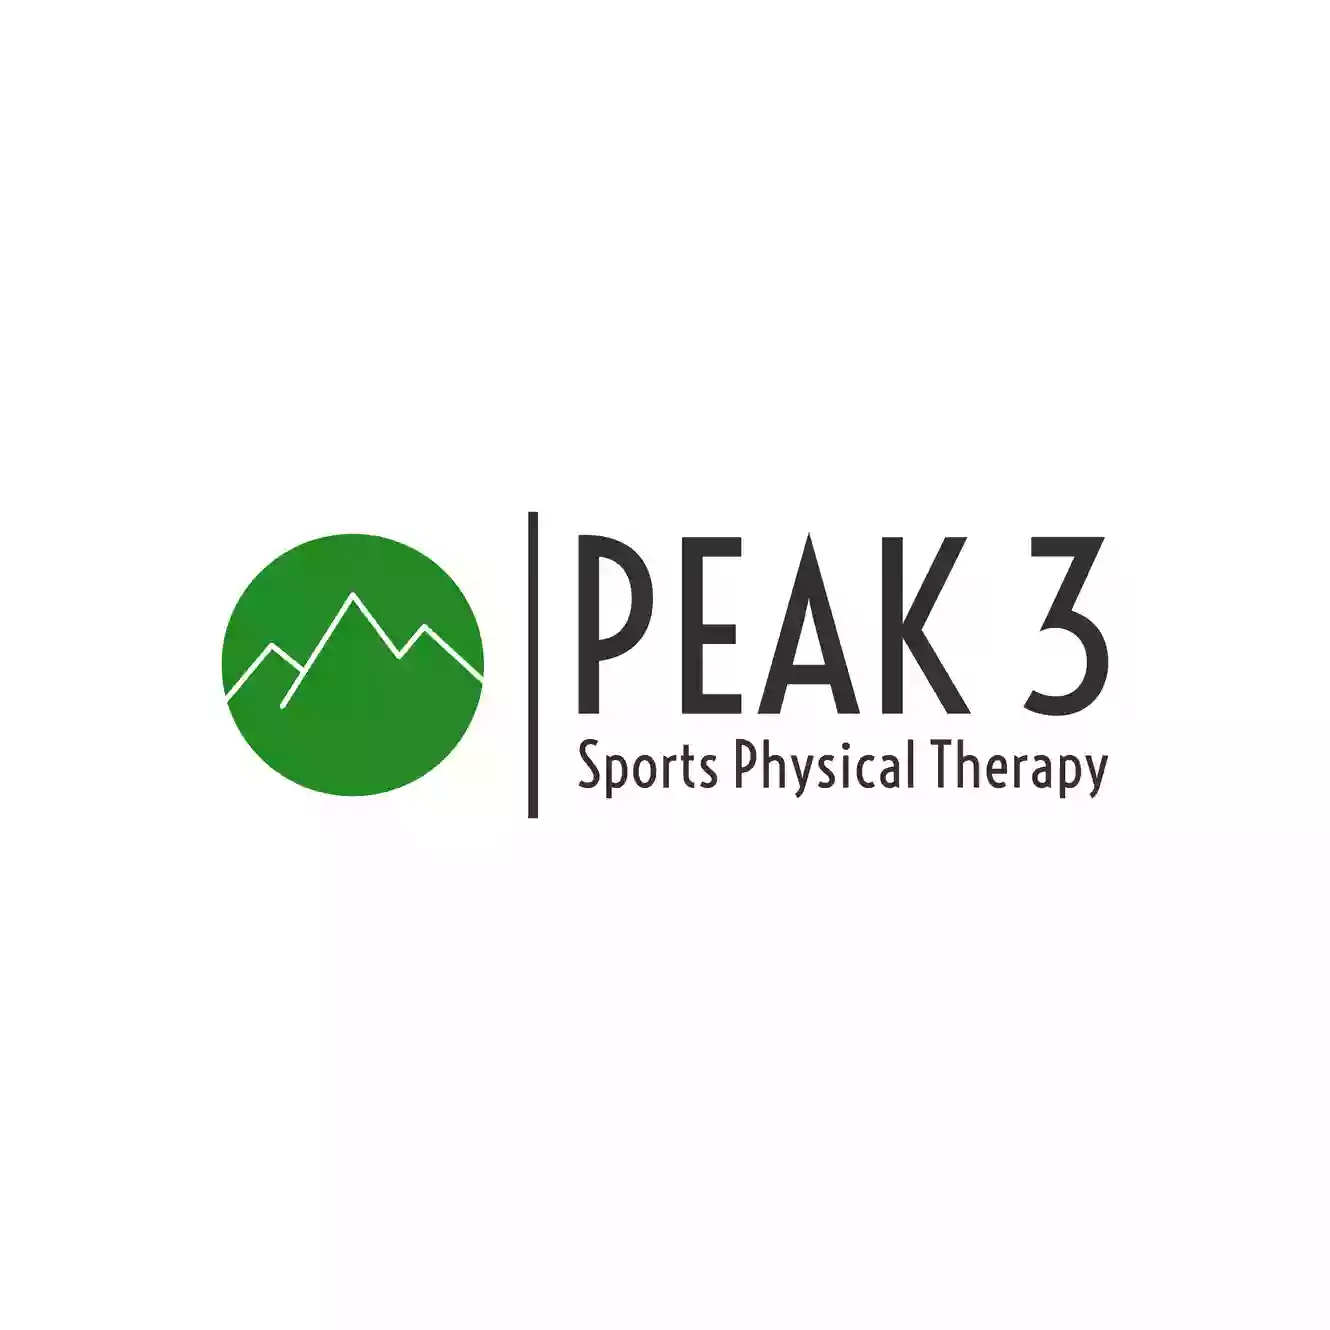 Peak 3 Sports Physical Therapy